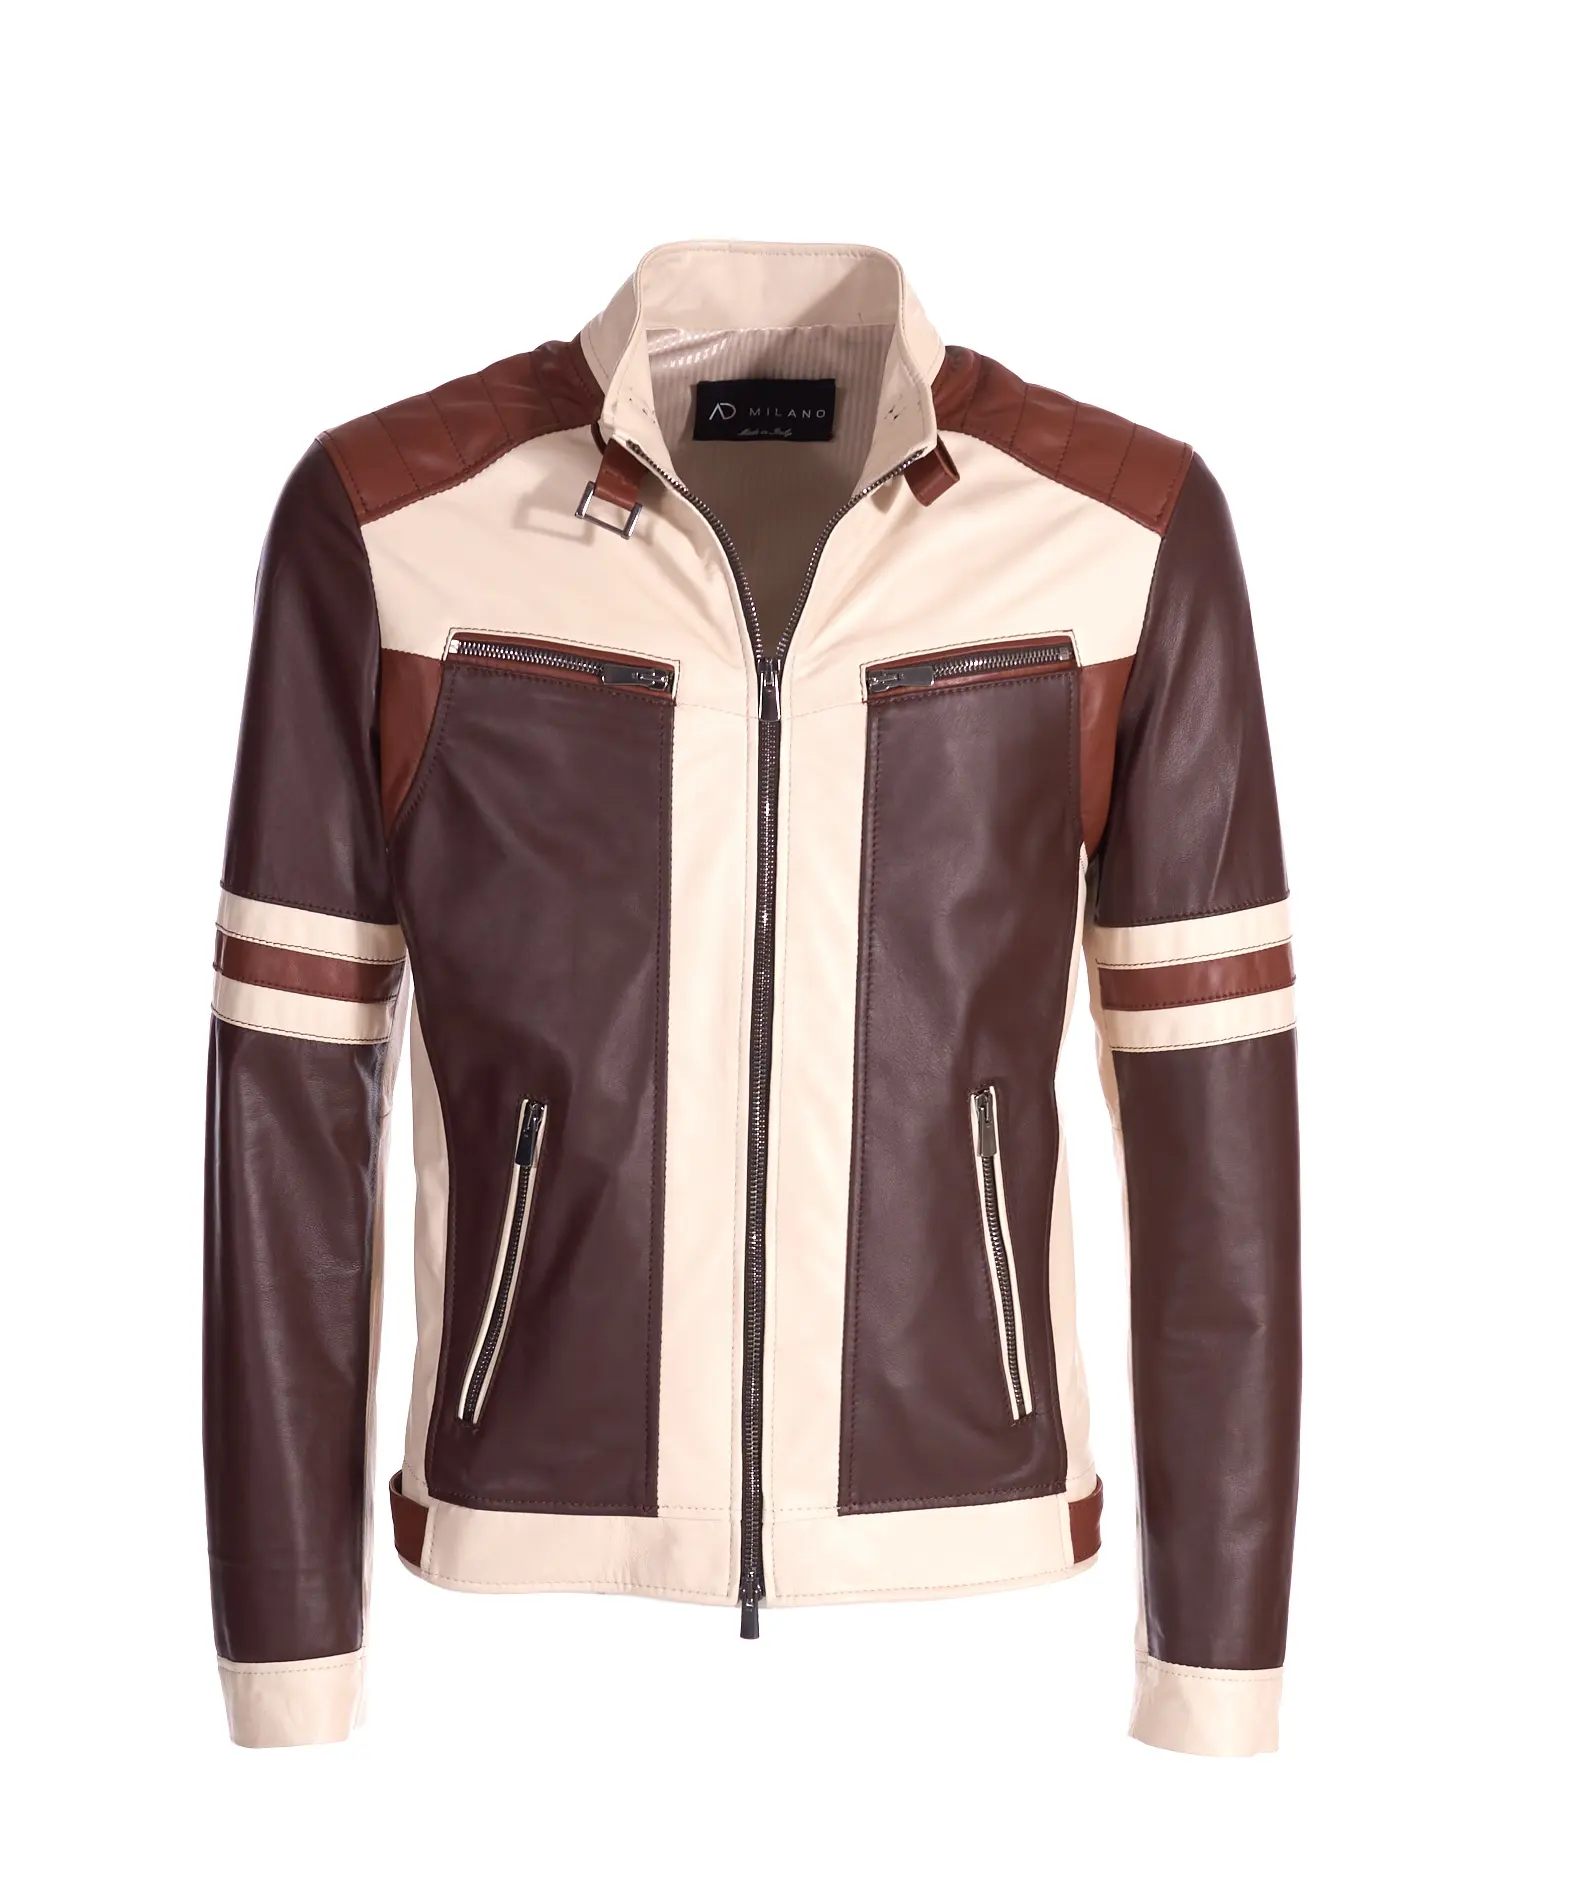 Biker Leather Jacket Multicolor Made in Italy Italian Product Everyday Life for Men Moto-cycle Jacket Real Leather Cropped Biker